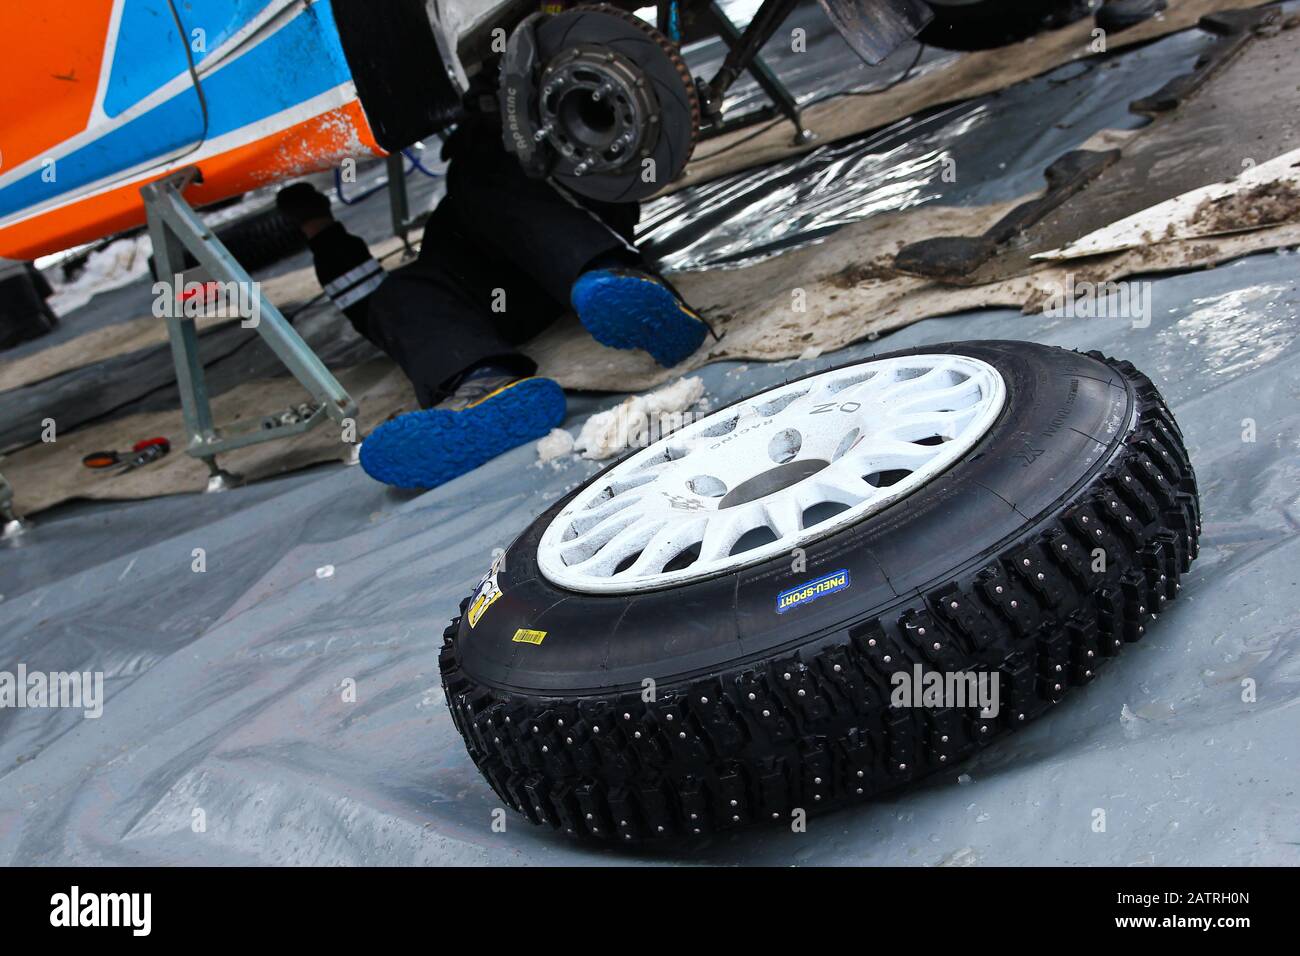 A detail of the tyre with studs used for the rally cars to have a better control on snow and ice. Lies in front of the car. Stock Photo